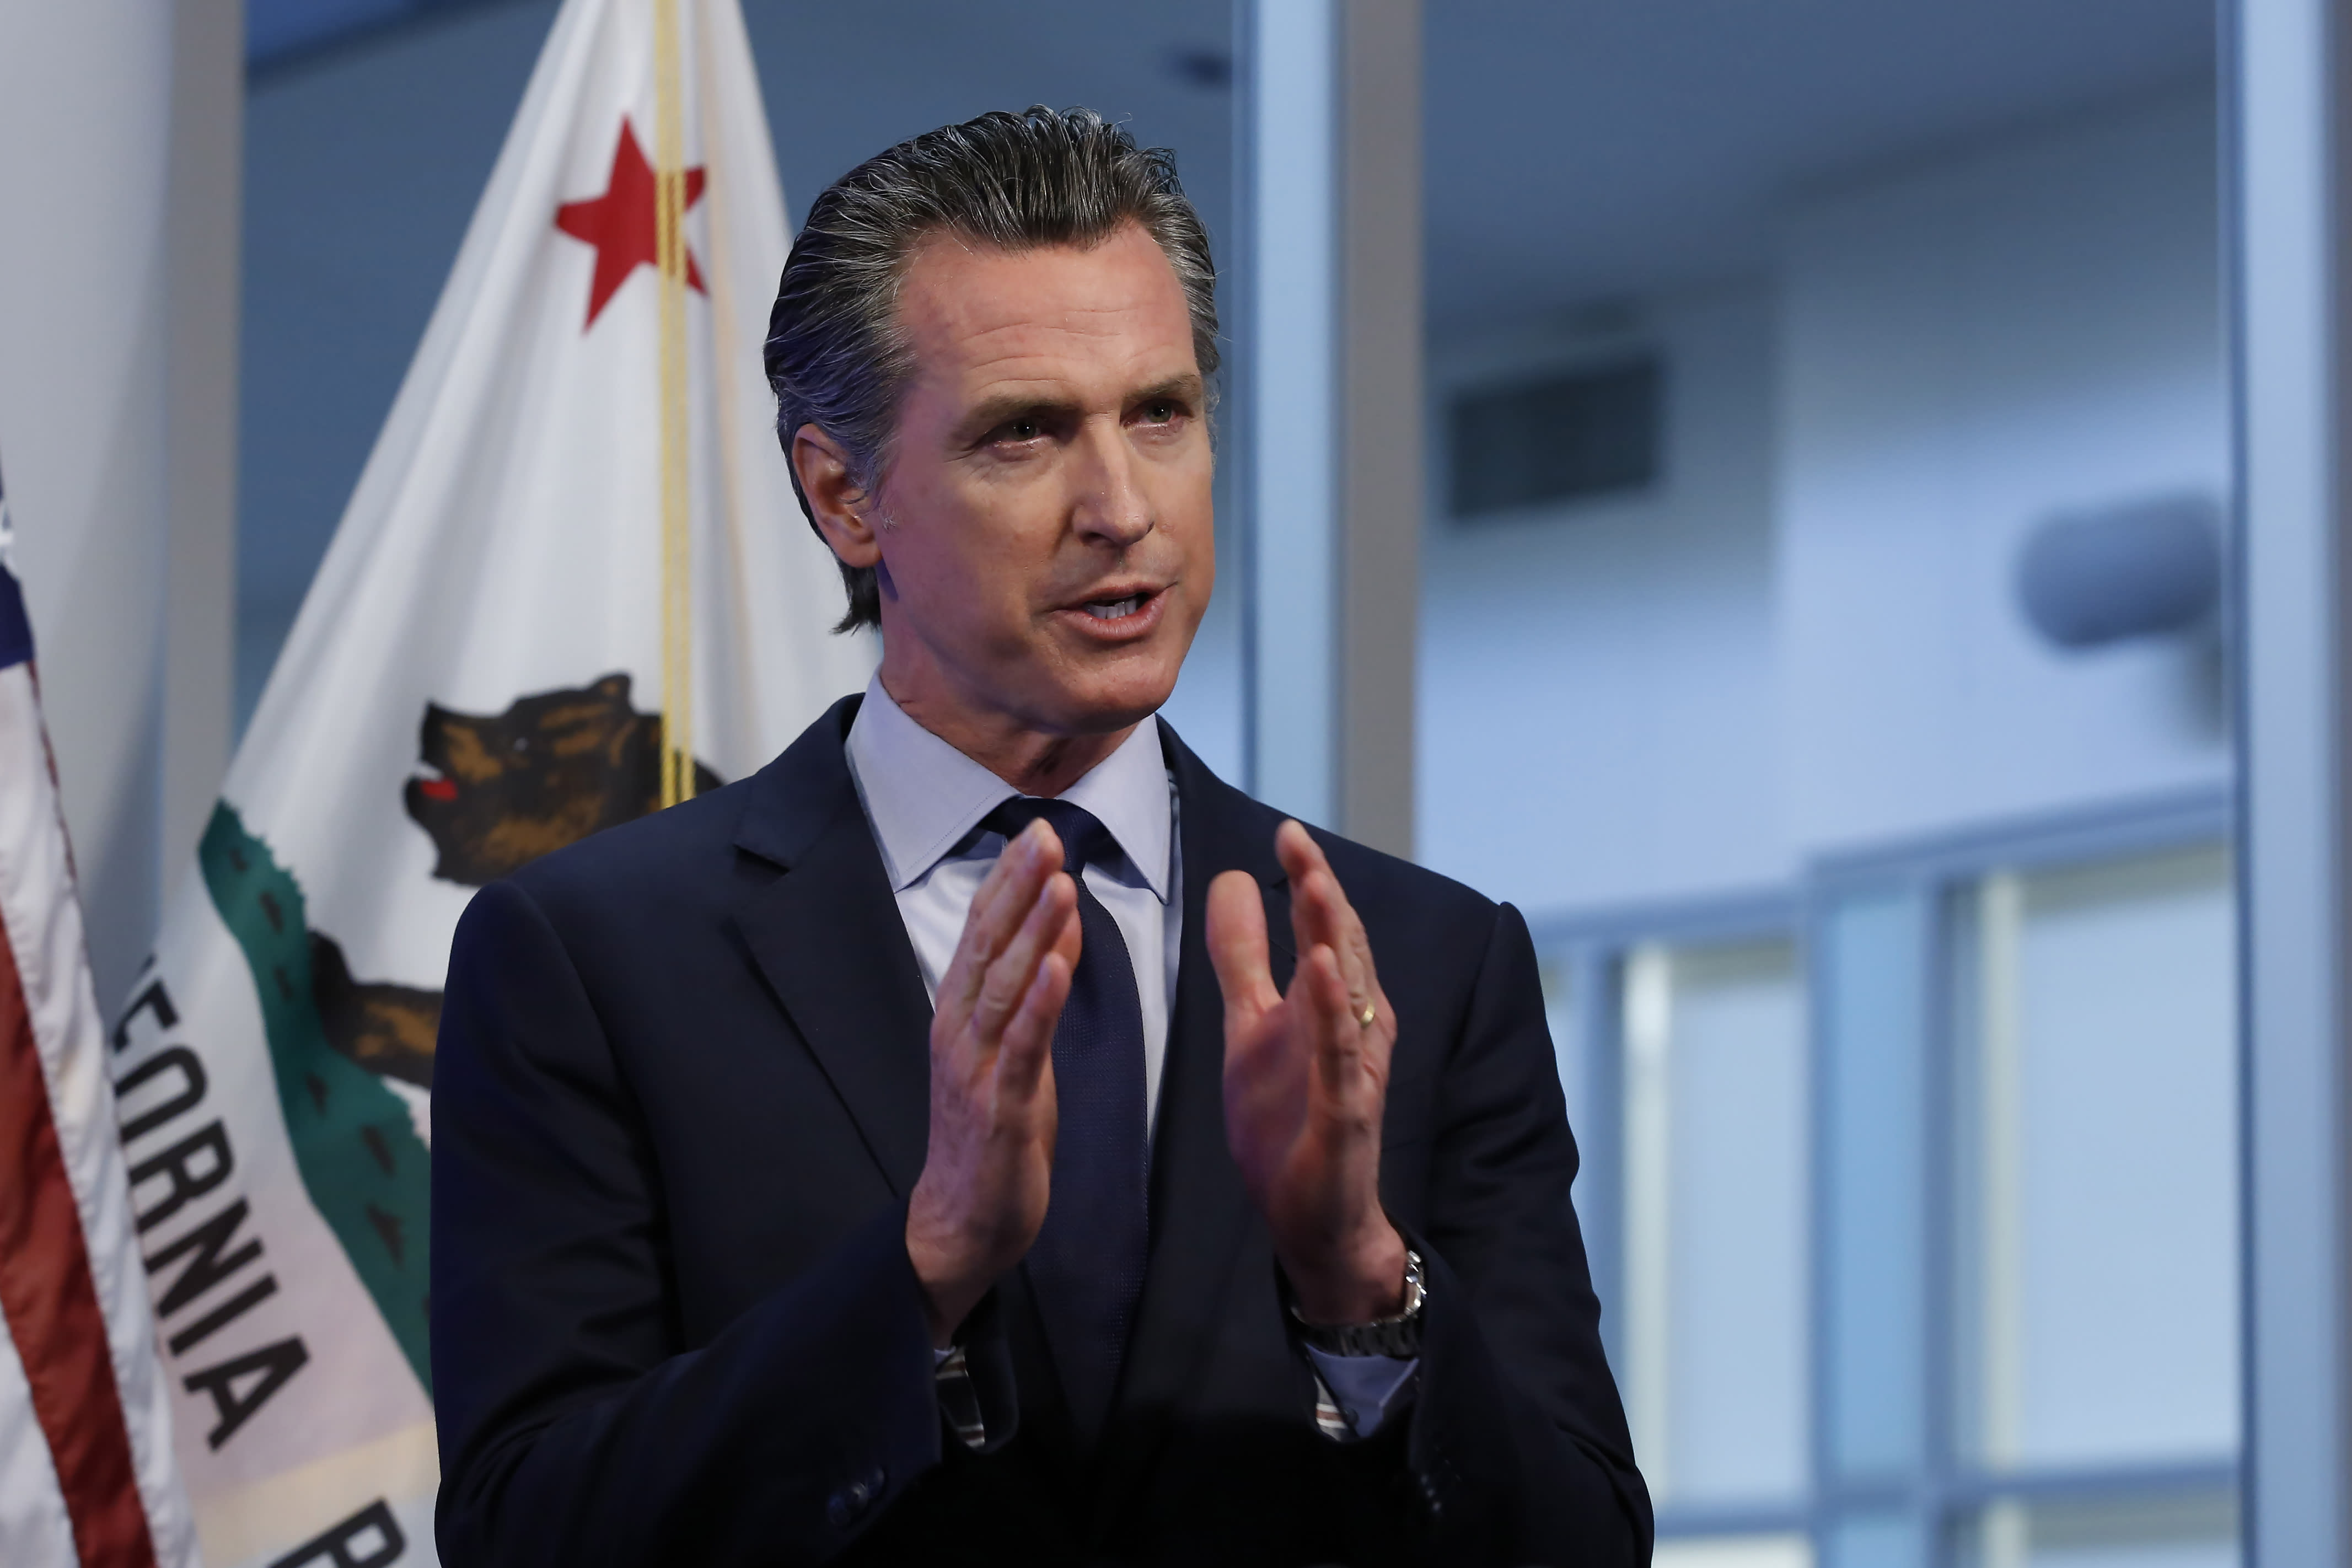 California governor cancels Covid briefing on security issues